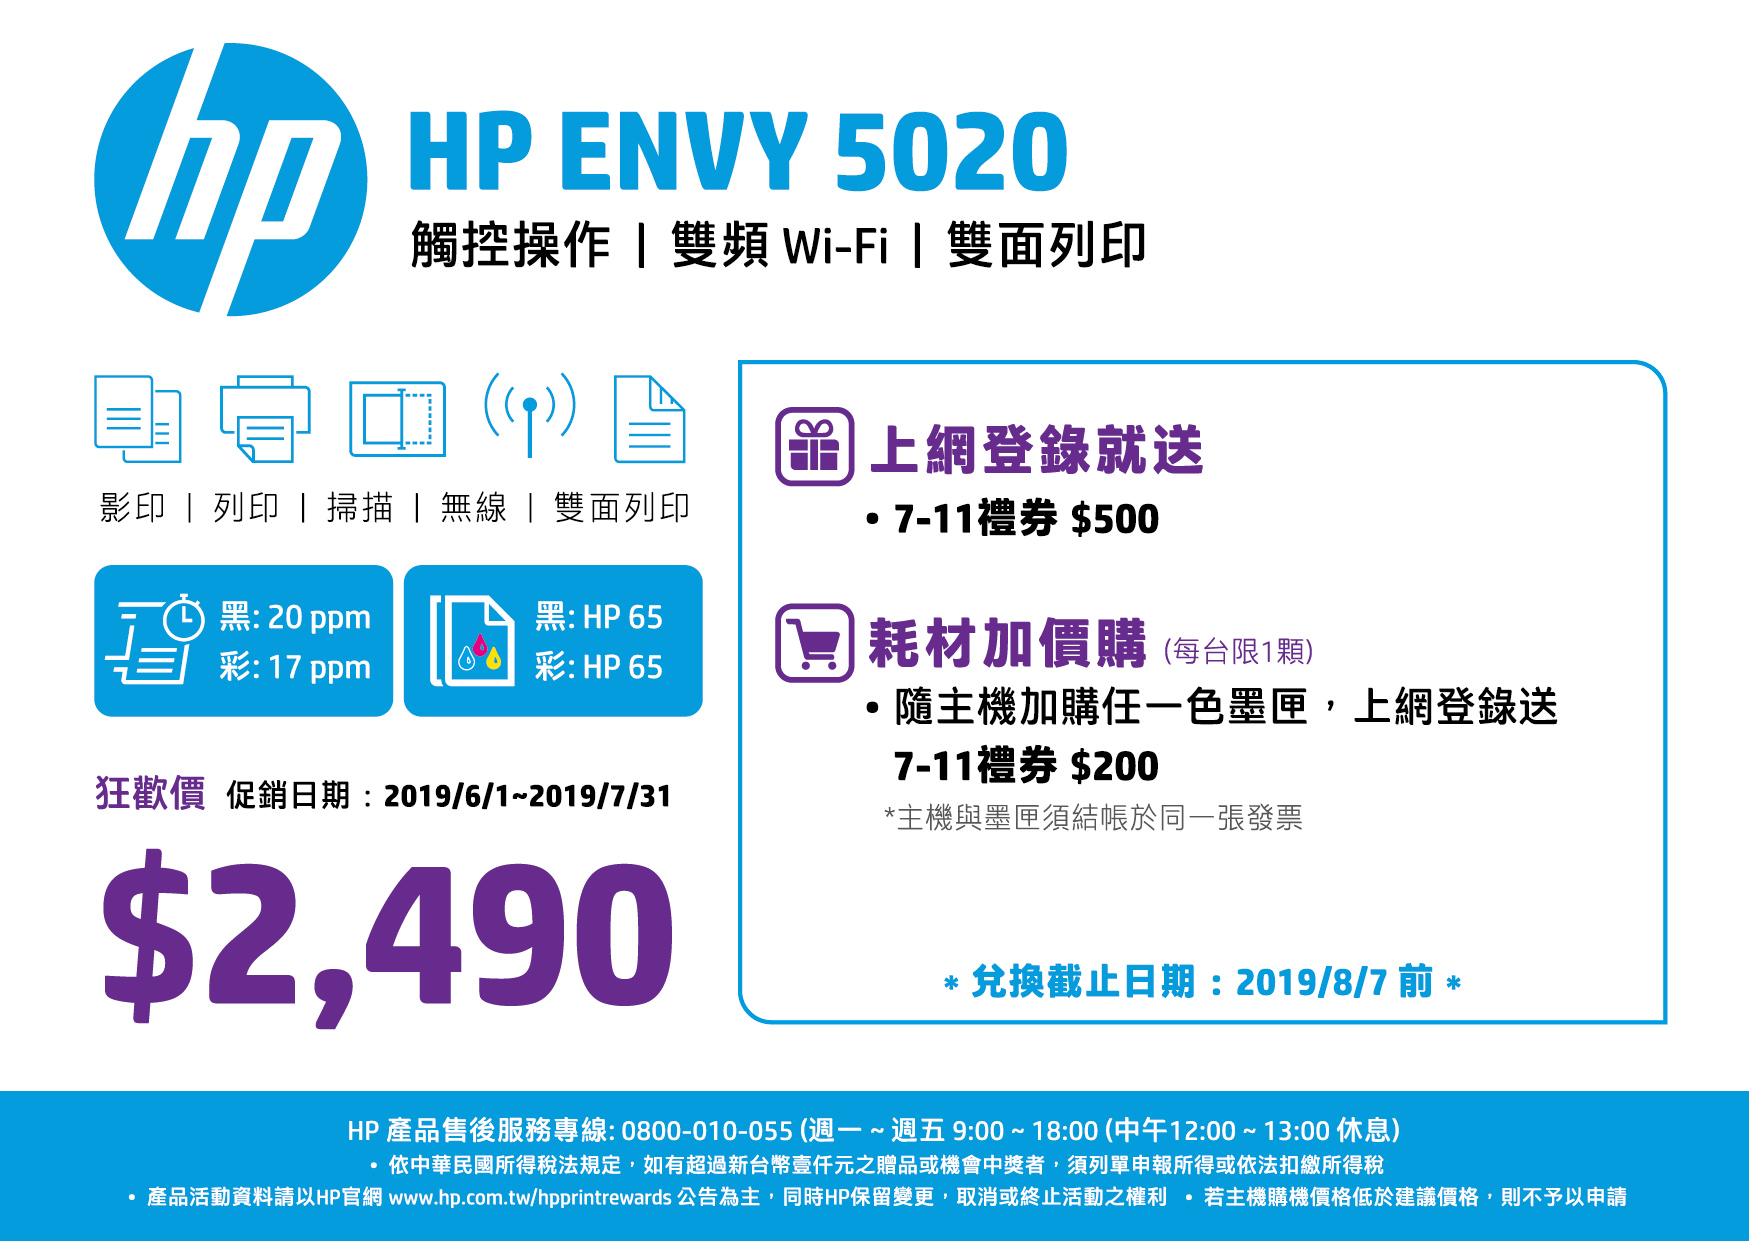 HP ENVY 5020 All-in-One 印表機 (Z4A69A)